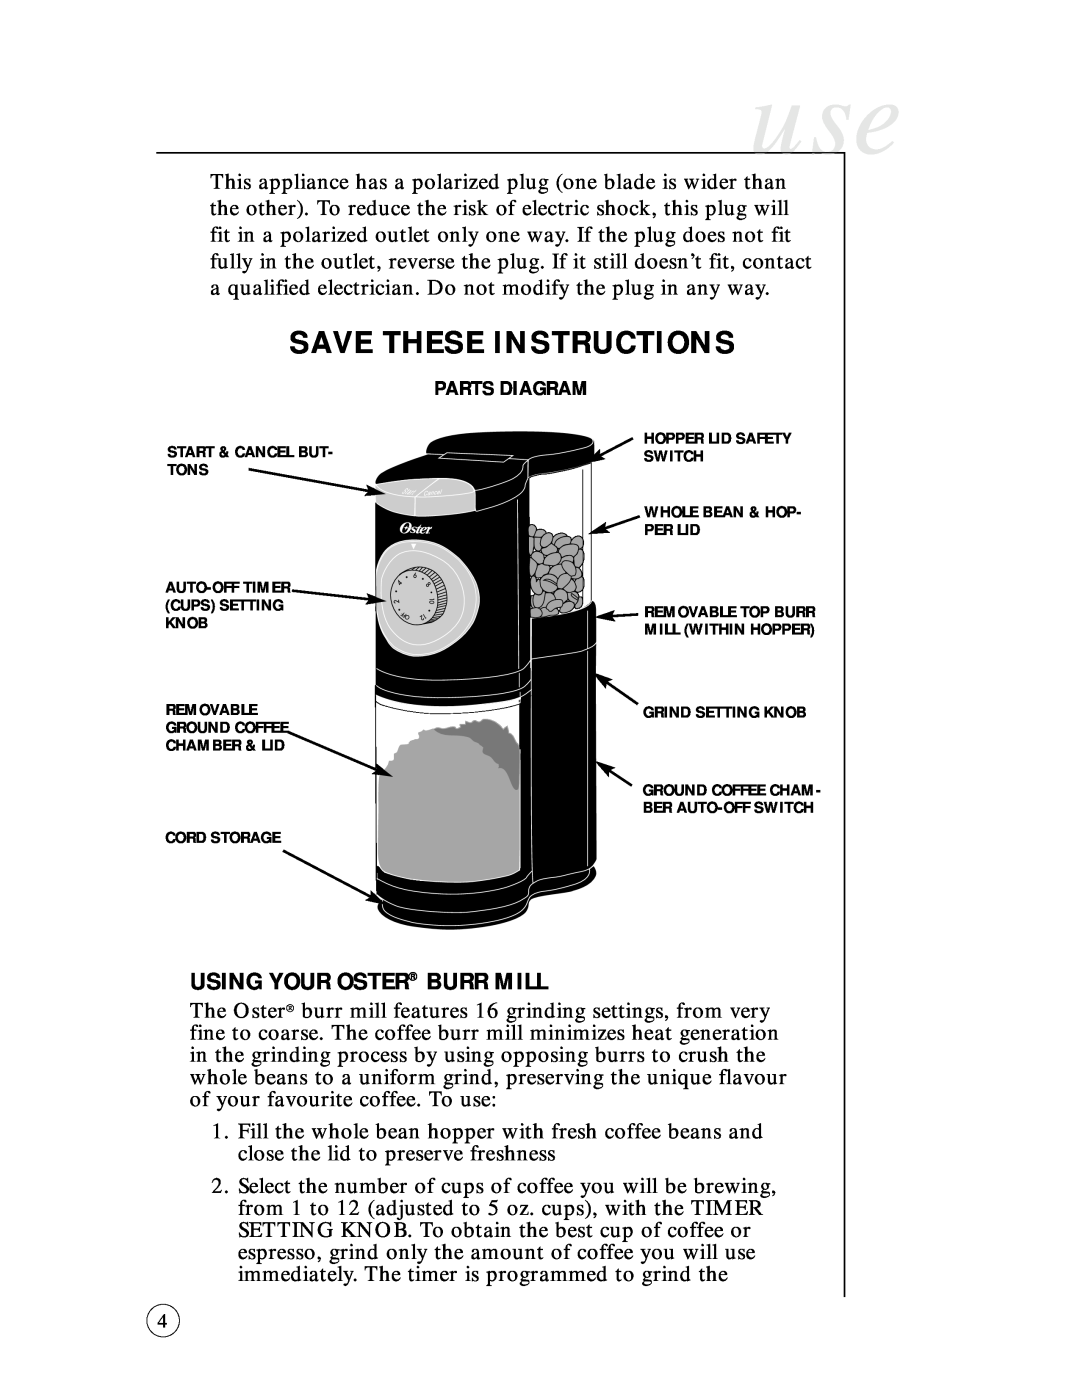 Oster 6389-33 user manual Using Your Oster Burr Mill, Parts Diagram, Save These Instructions 